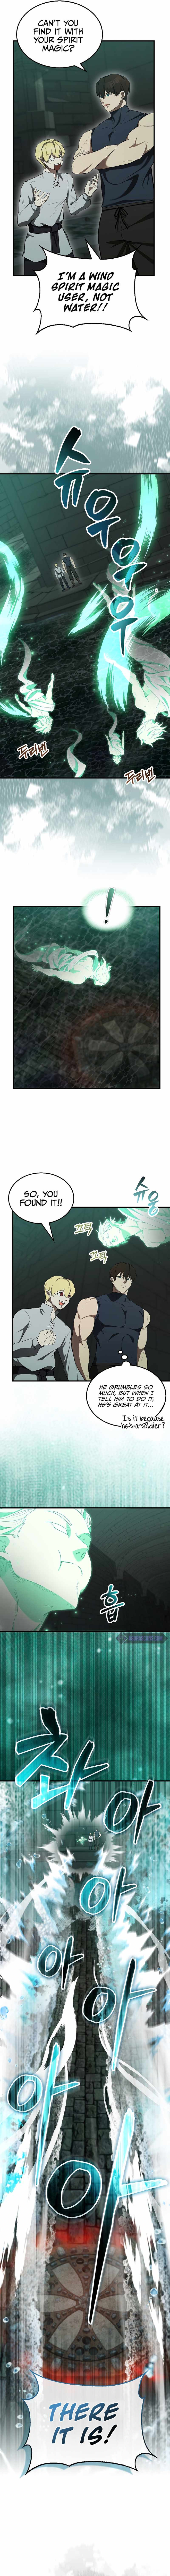 The Extra is Too Strong Chapter 30-eng-li - Page 7